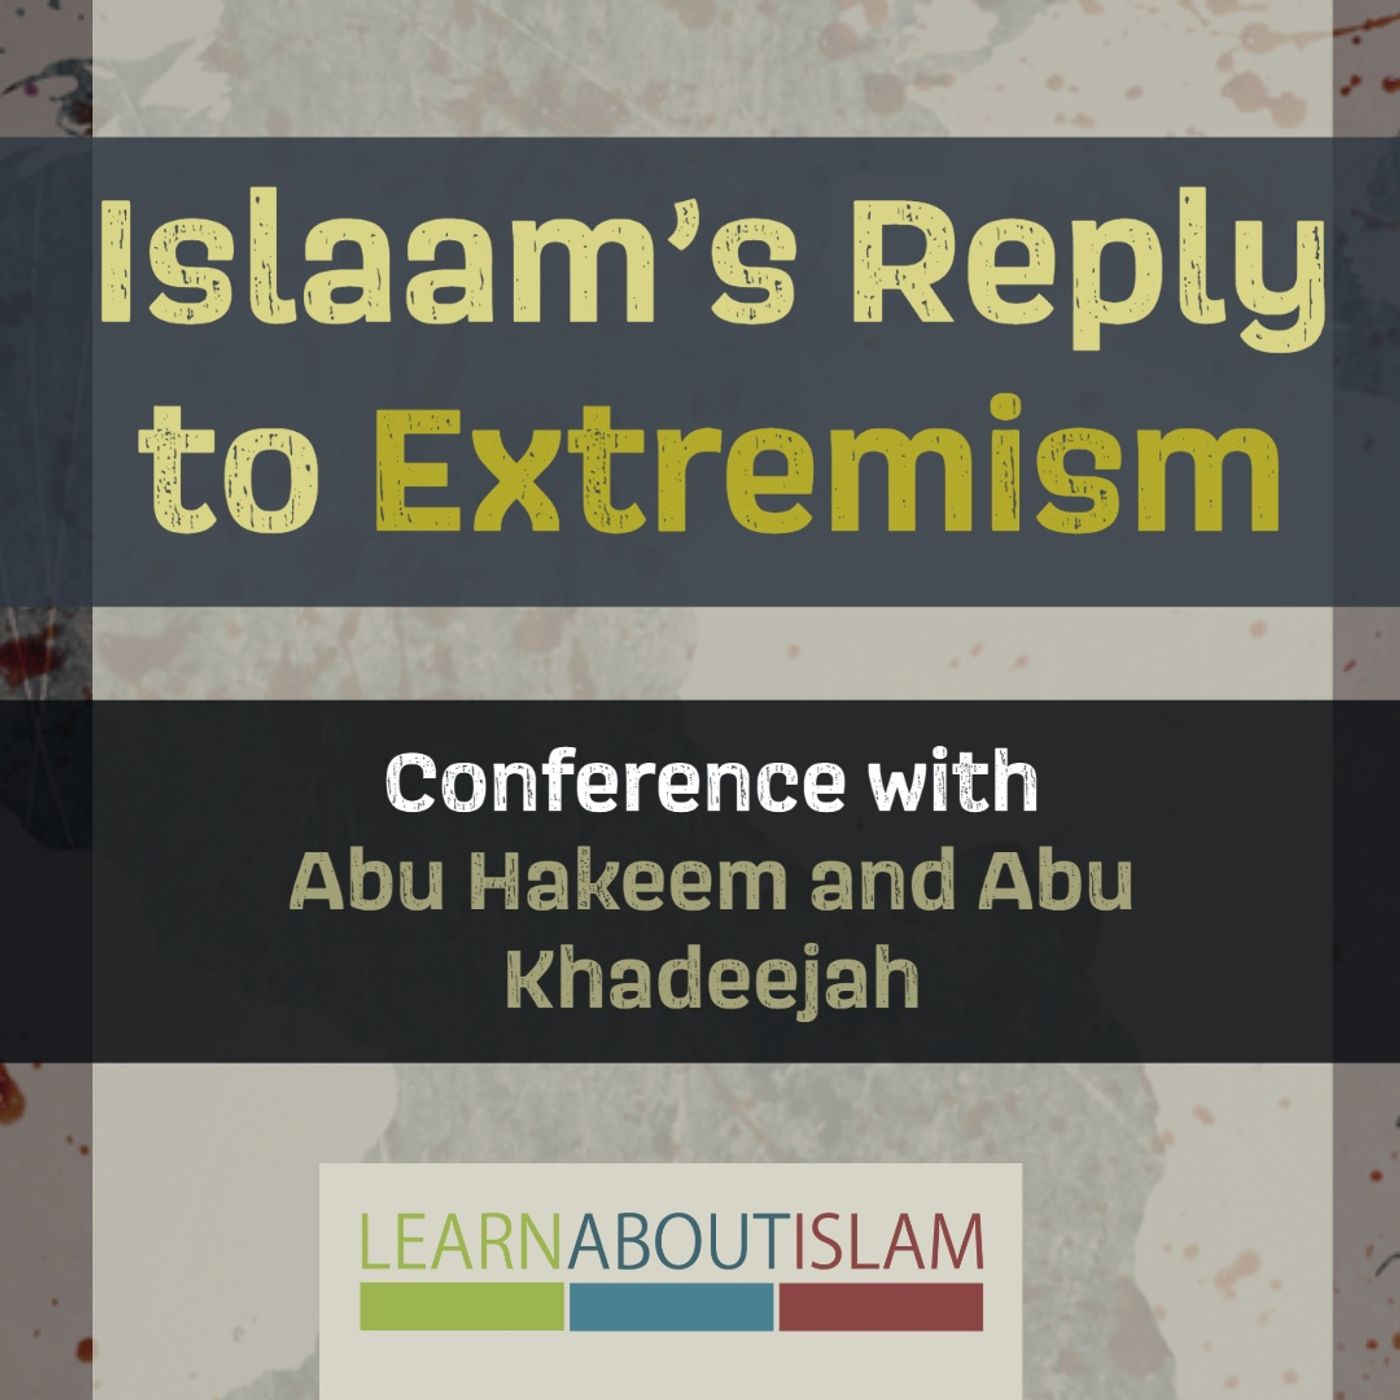 Islaam's Reply to Extremism - Q&A with Abu Khadeejah and Abu Hakeem